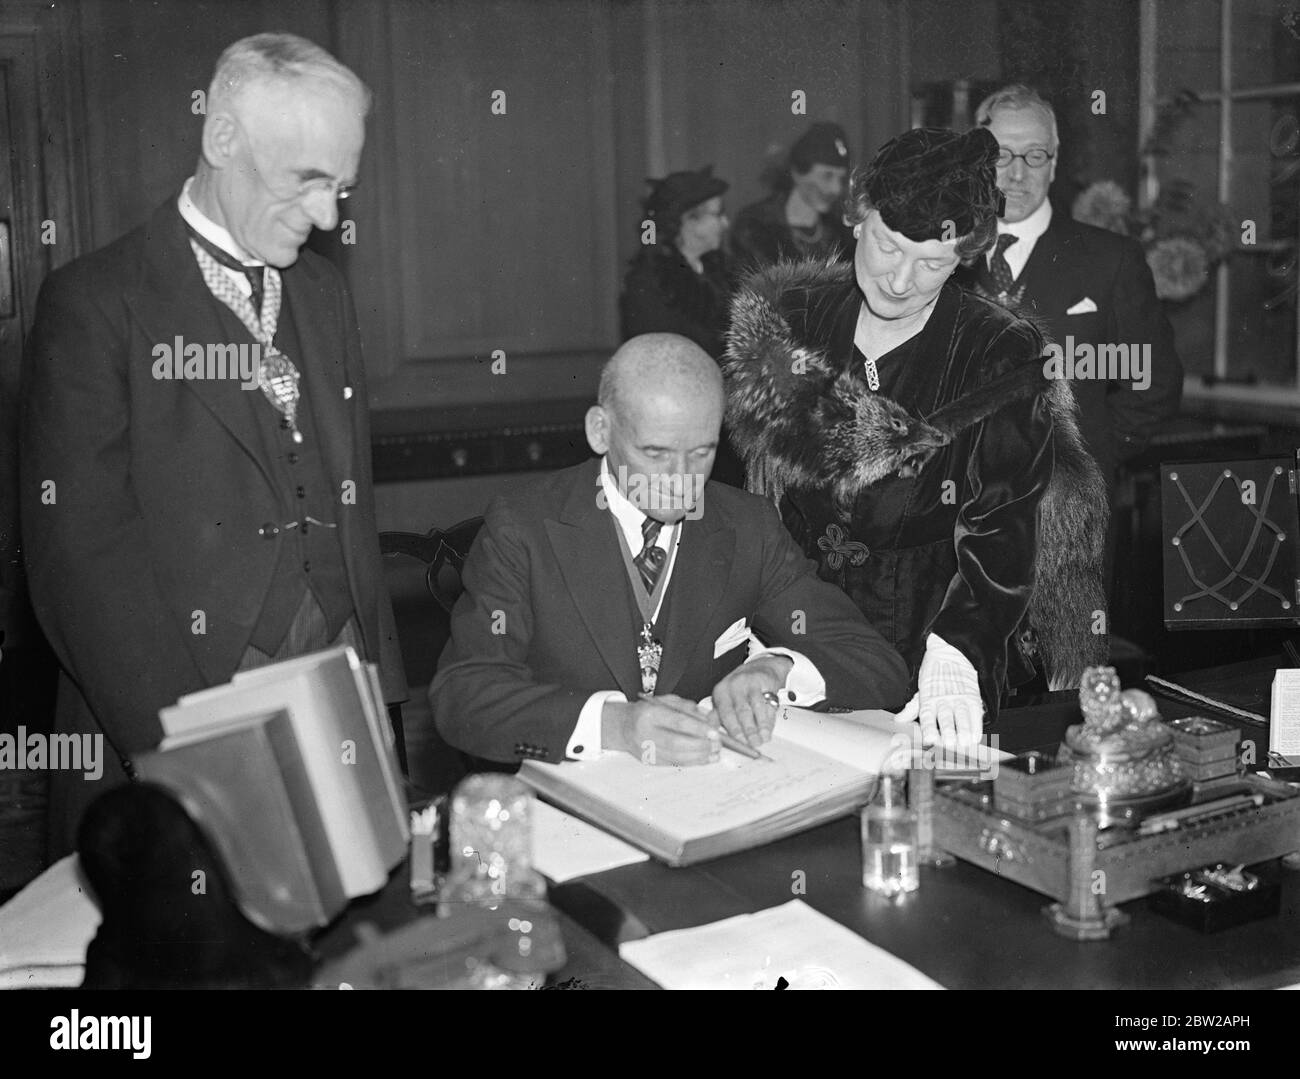 Lord Mayor and lady Mayoress at County Hall. The Lord Mayor of London, Sir George Broadbridge, and the lady Mayoress, attended a meeting of the London County Council at County Hall, Westminster. Photo shows, the Lord Mayor of London, signing the distinguished visitors book. Watched by the lady Mayoress and Lord Snell, chairman of the London county council. 2 November1937 Stock Photo